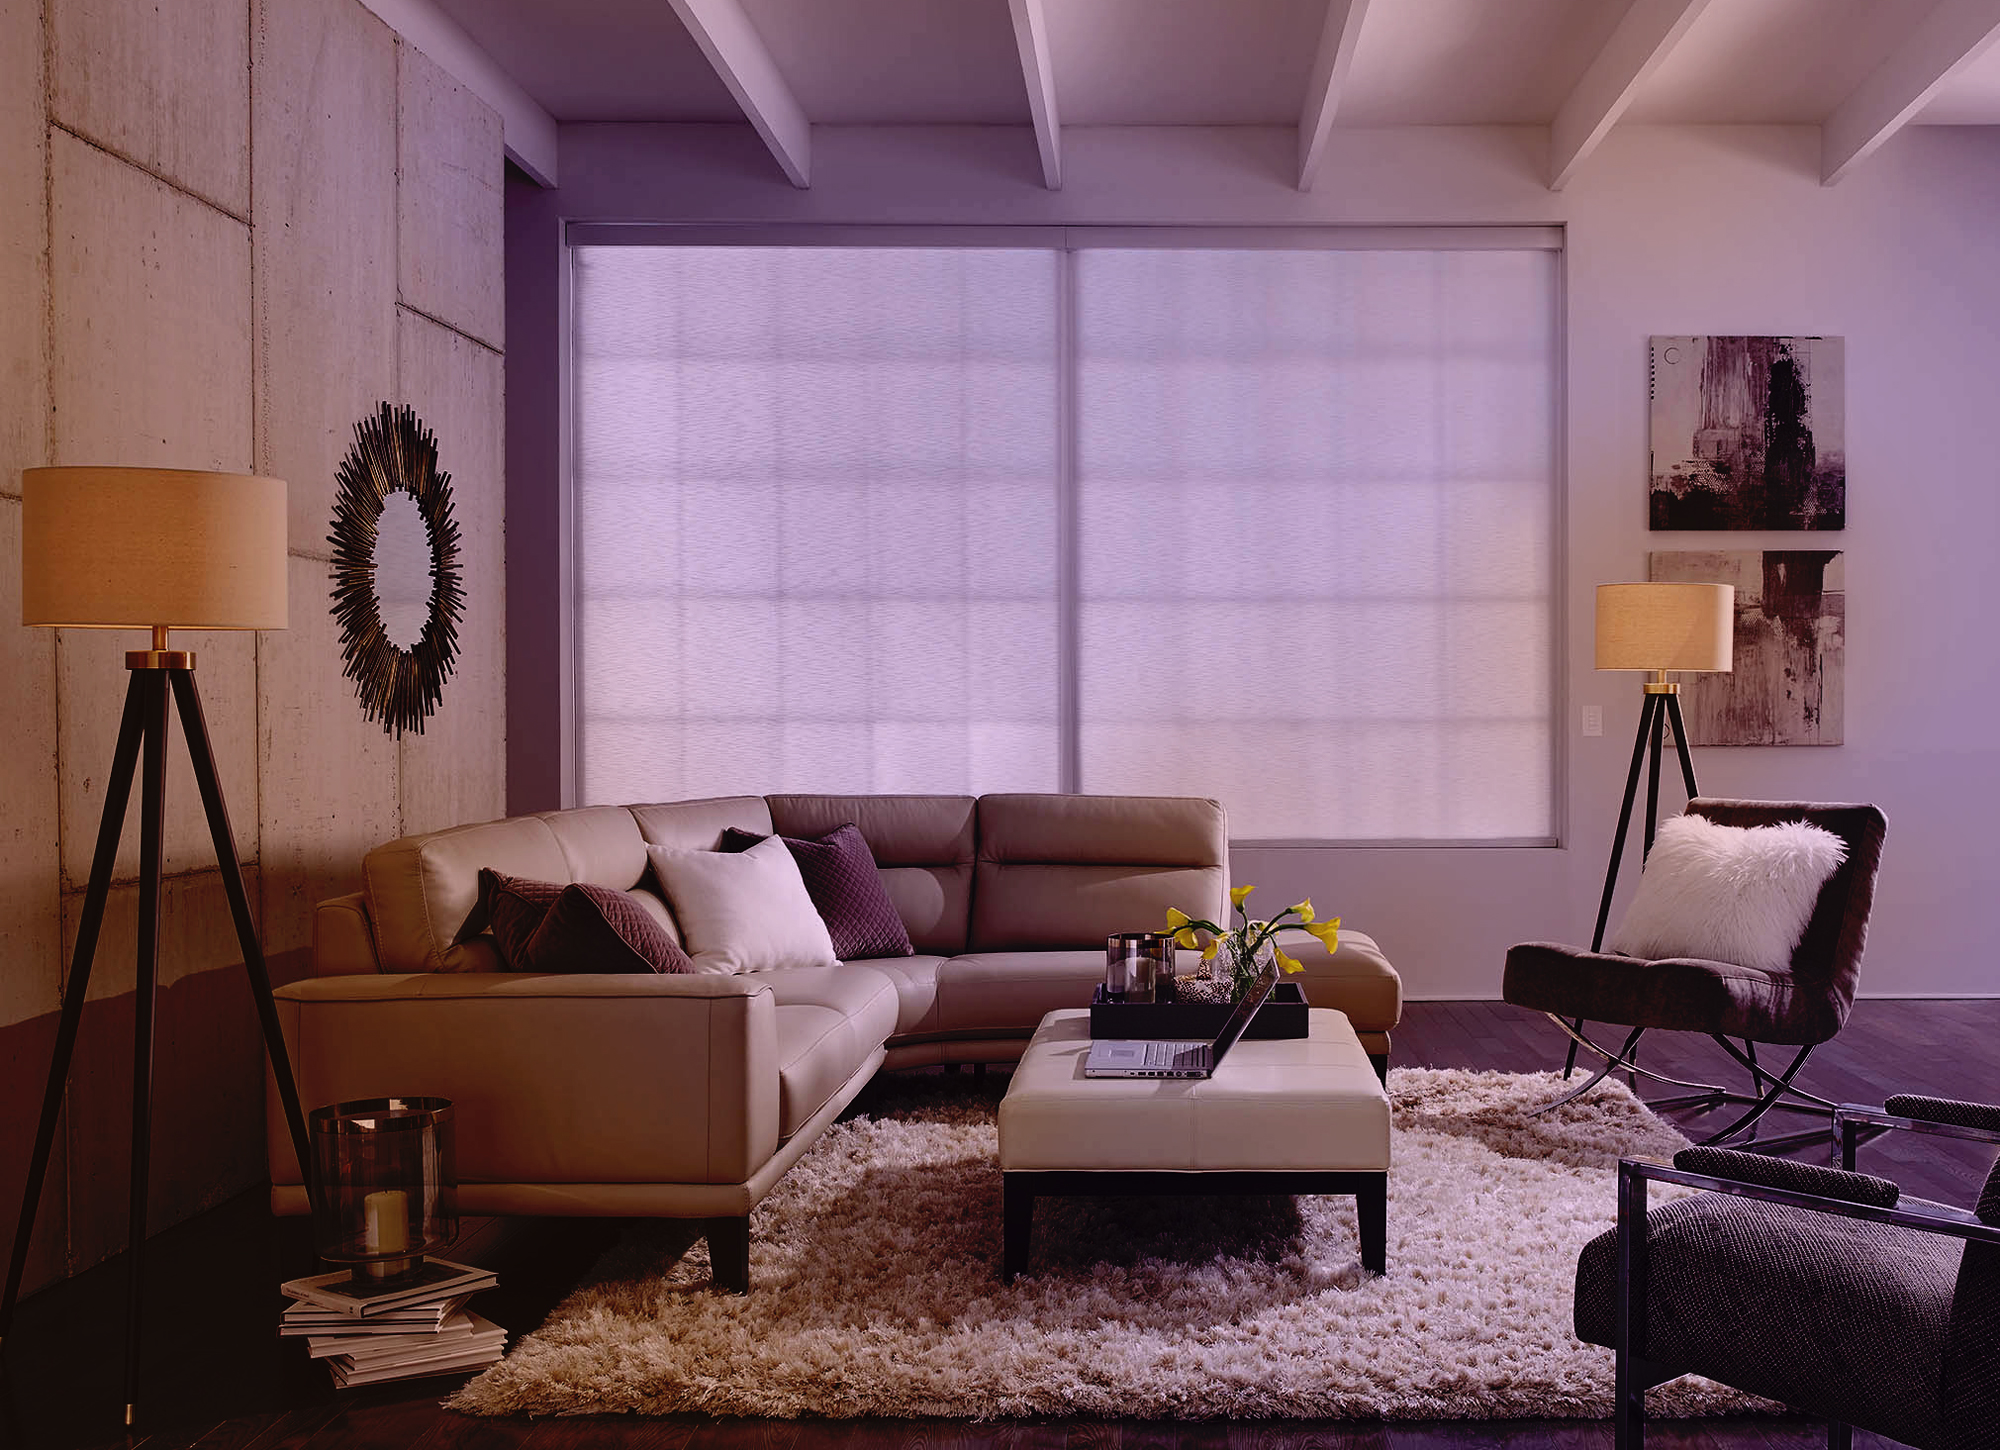 Image of a living room with entertaining lighting